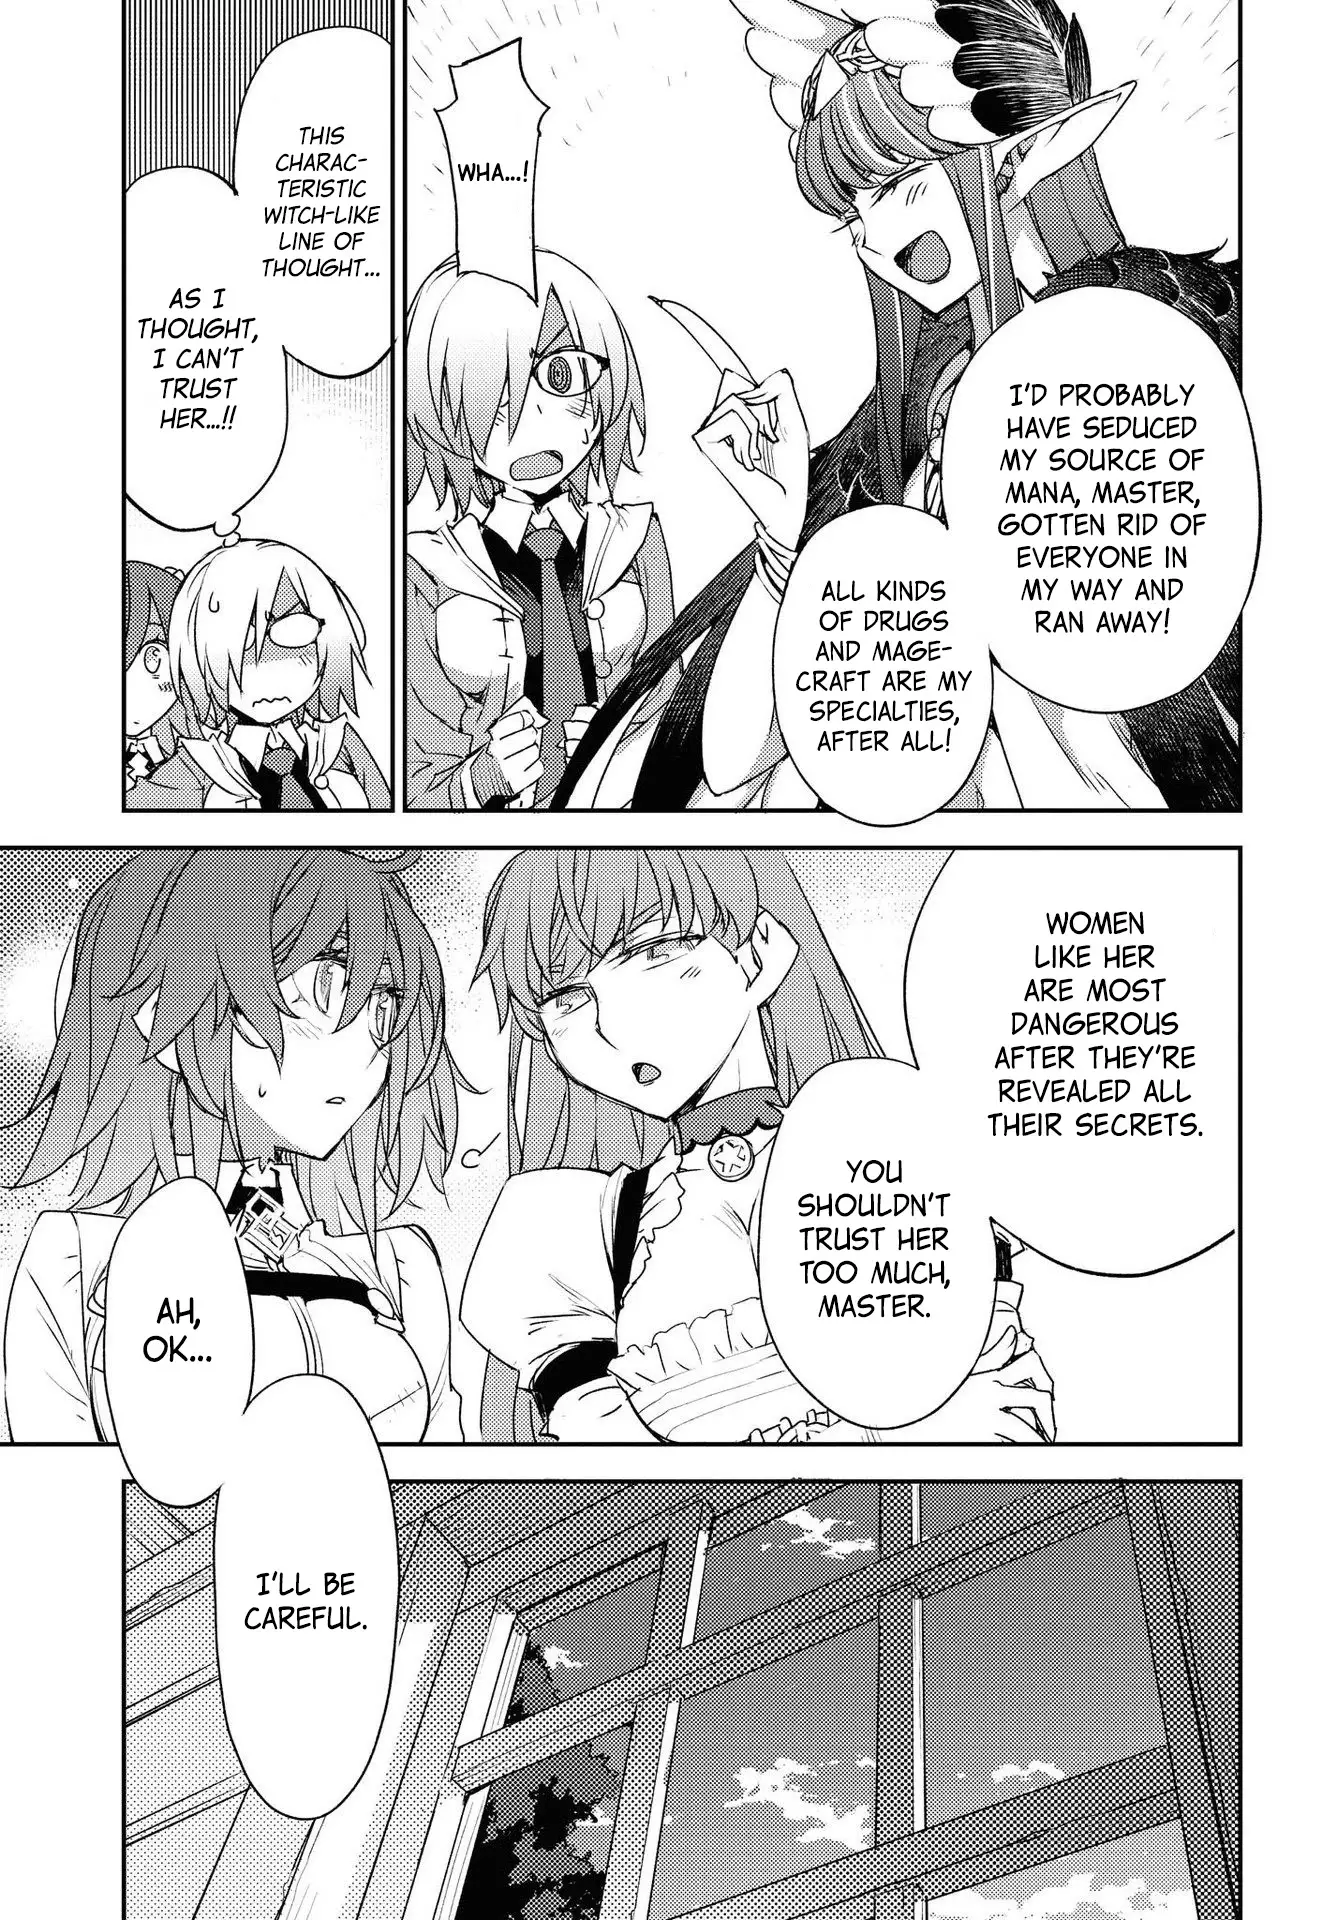 Fate/grand Order: Epic Of Remnant - Subspecies Singularity Iv: Taboo Advent Salem: Salem Of Heresy - 19 page 19